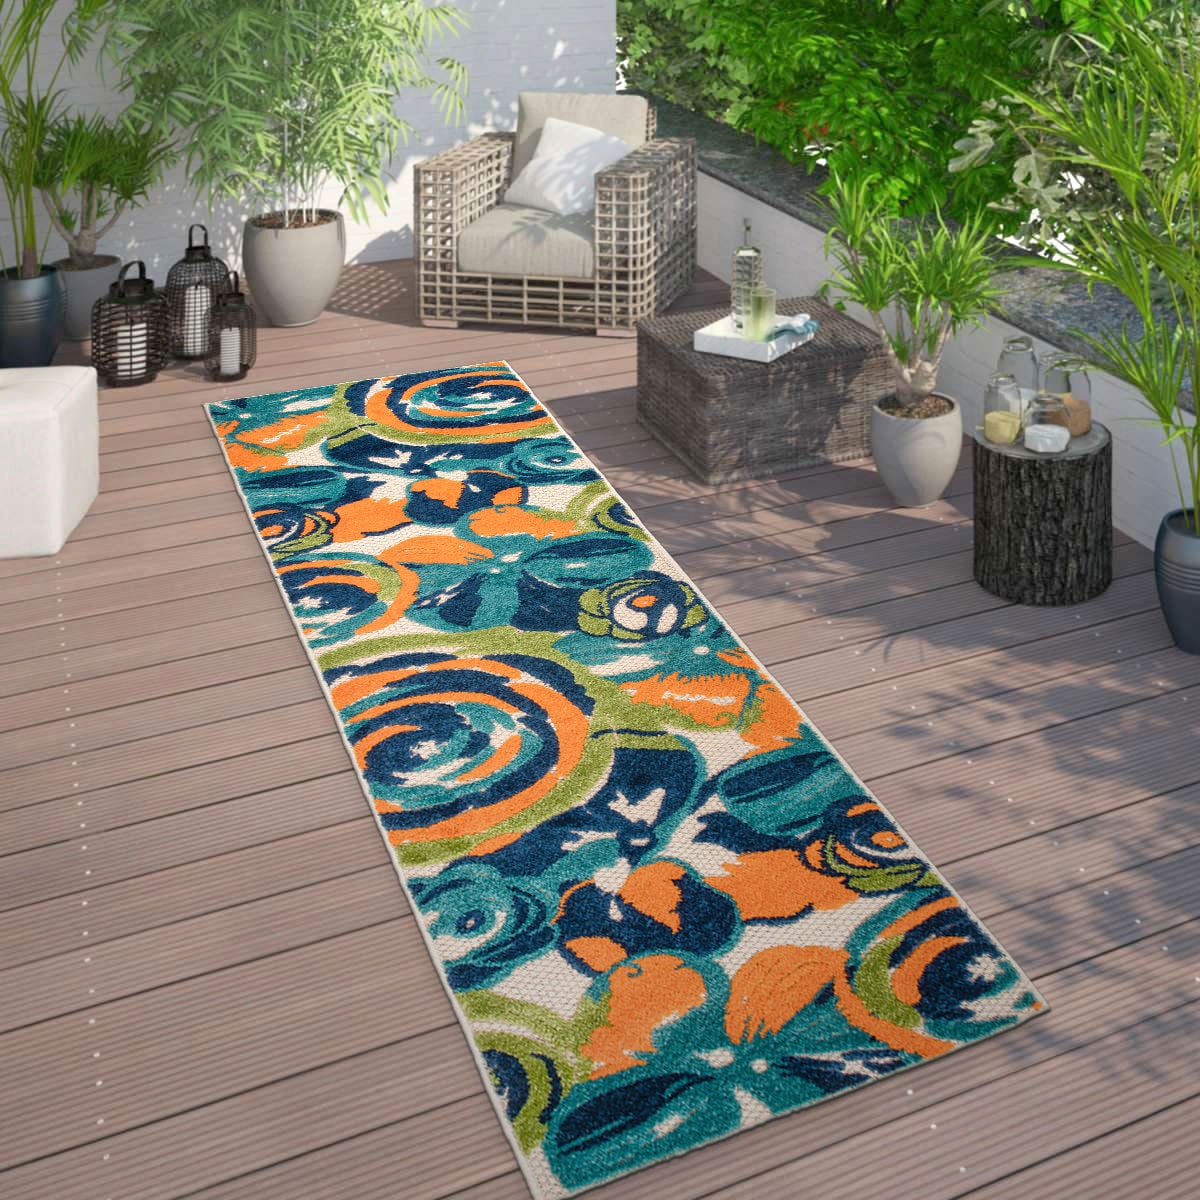 8x10 Water Resistant, Large Indoor Outdoor Rugs for Patios, Front Door  Entry, Entryway, Deck, Porch, Balcony, Outside Area Rug for Patio, Multi-Color, Medallion